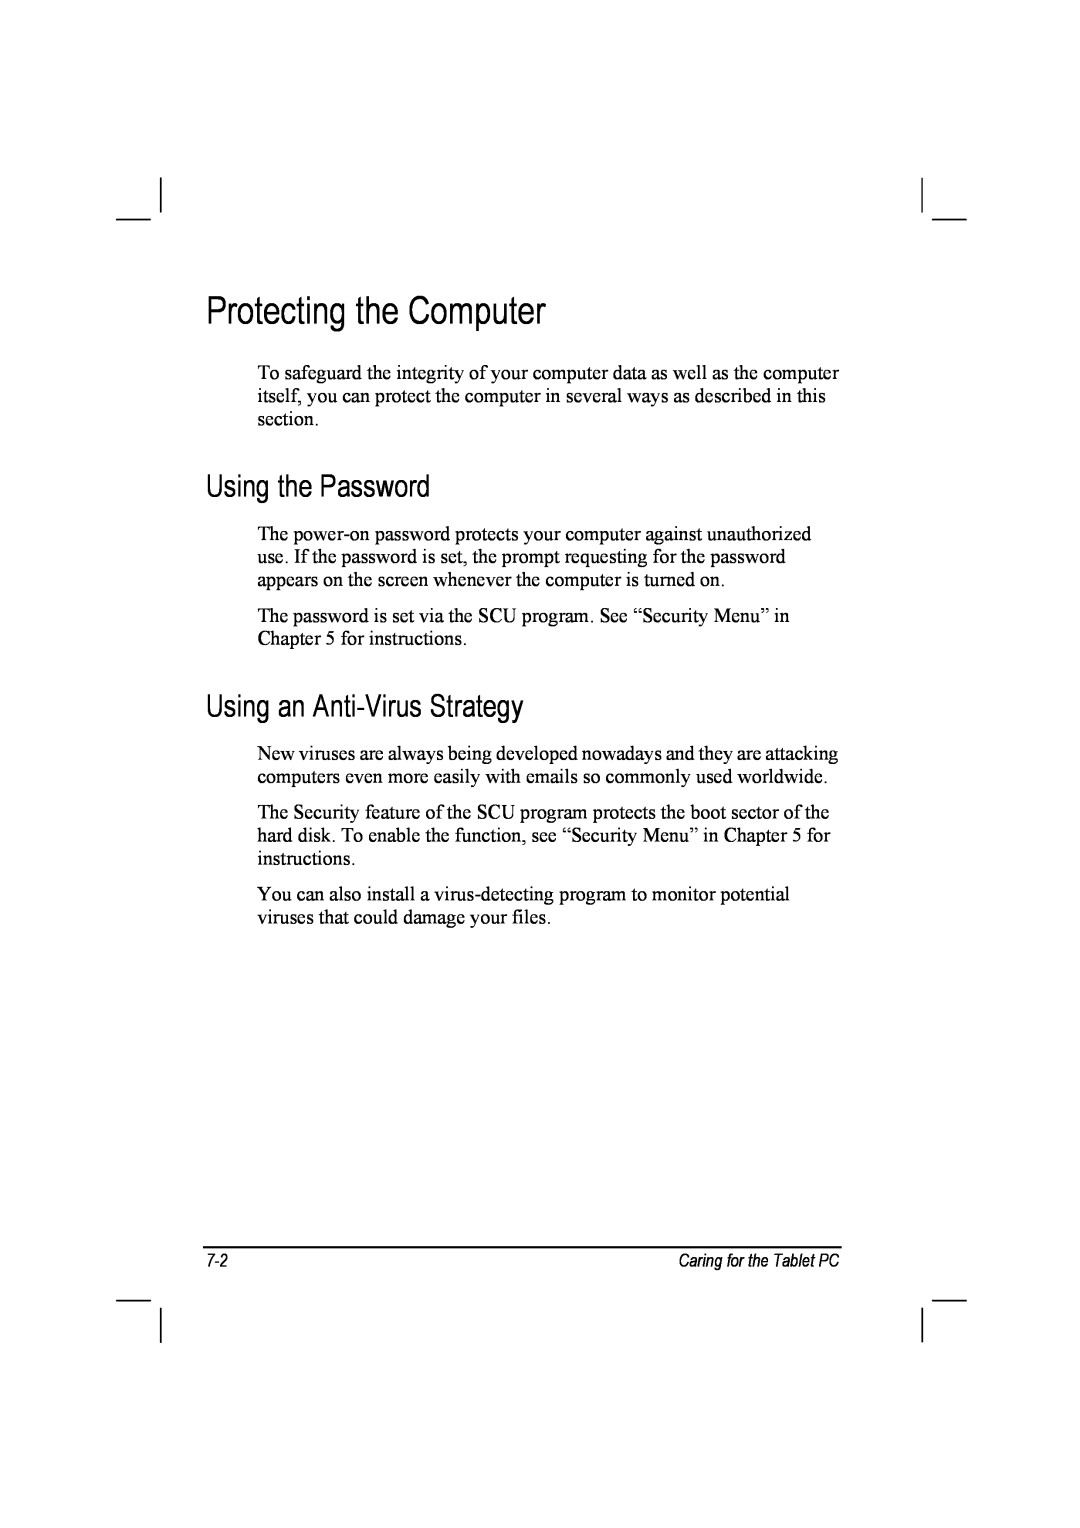 TAG 10 manual Protecting the Computer, Using the Password, Using an Anti-Virus Strategy 